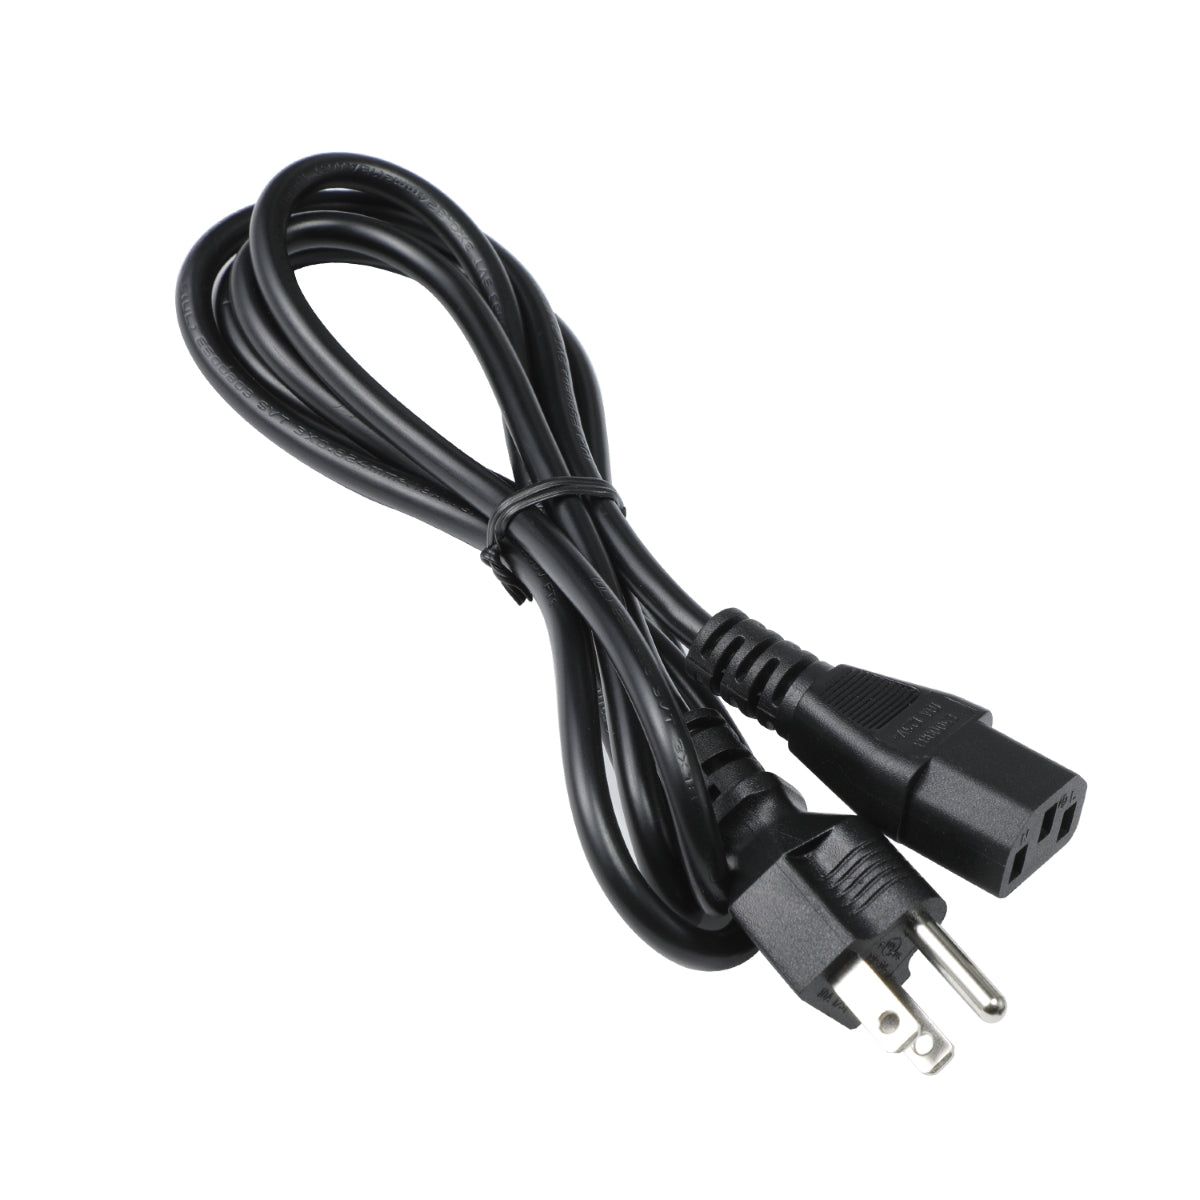 Power Cord for BenQ ZOWIE XL2411P e-Sports Monitor.